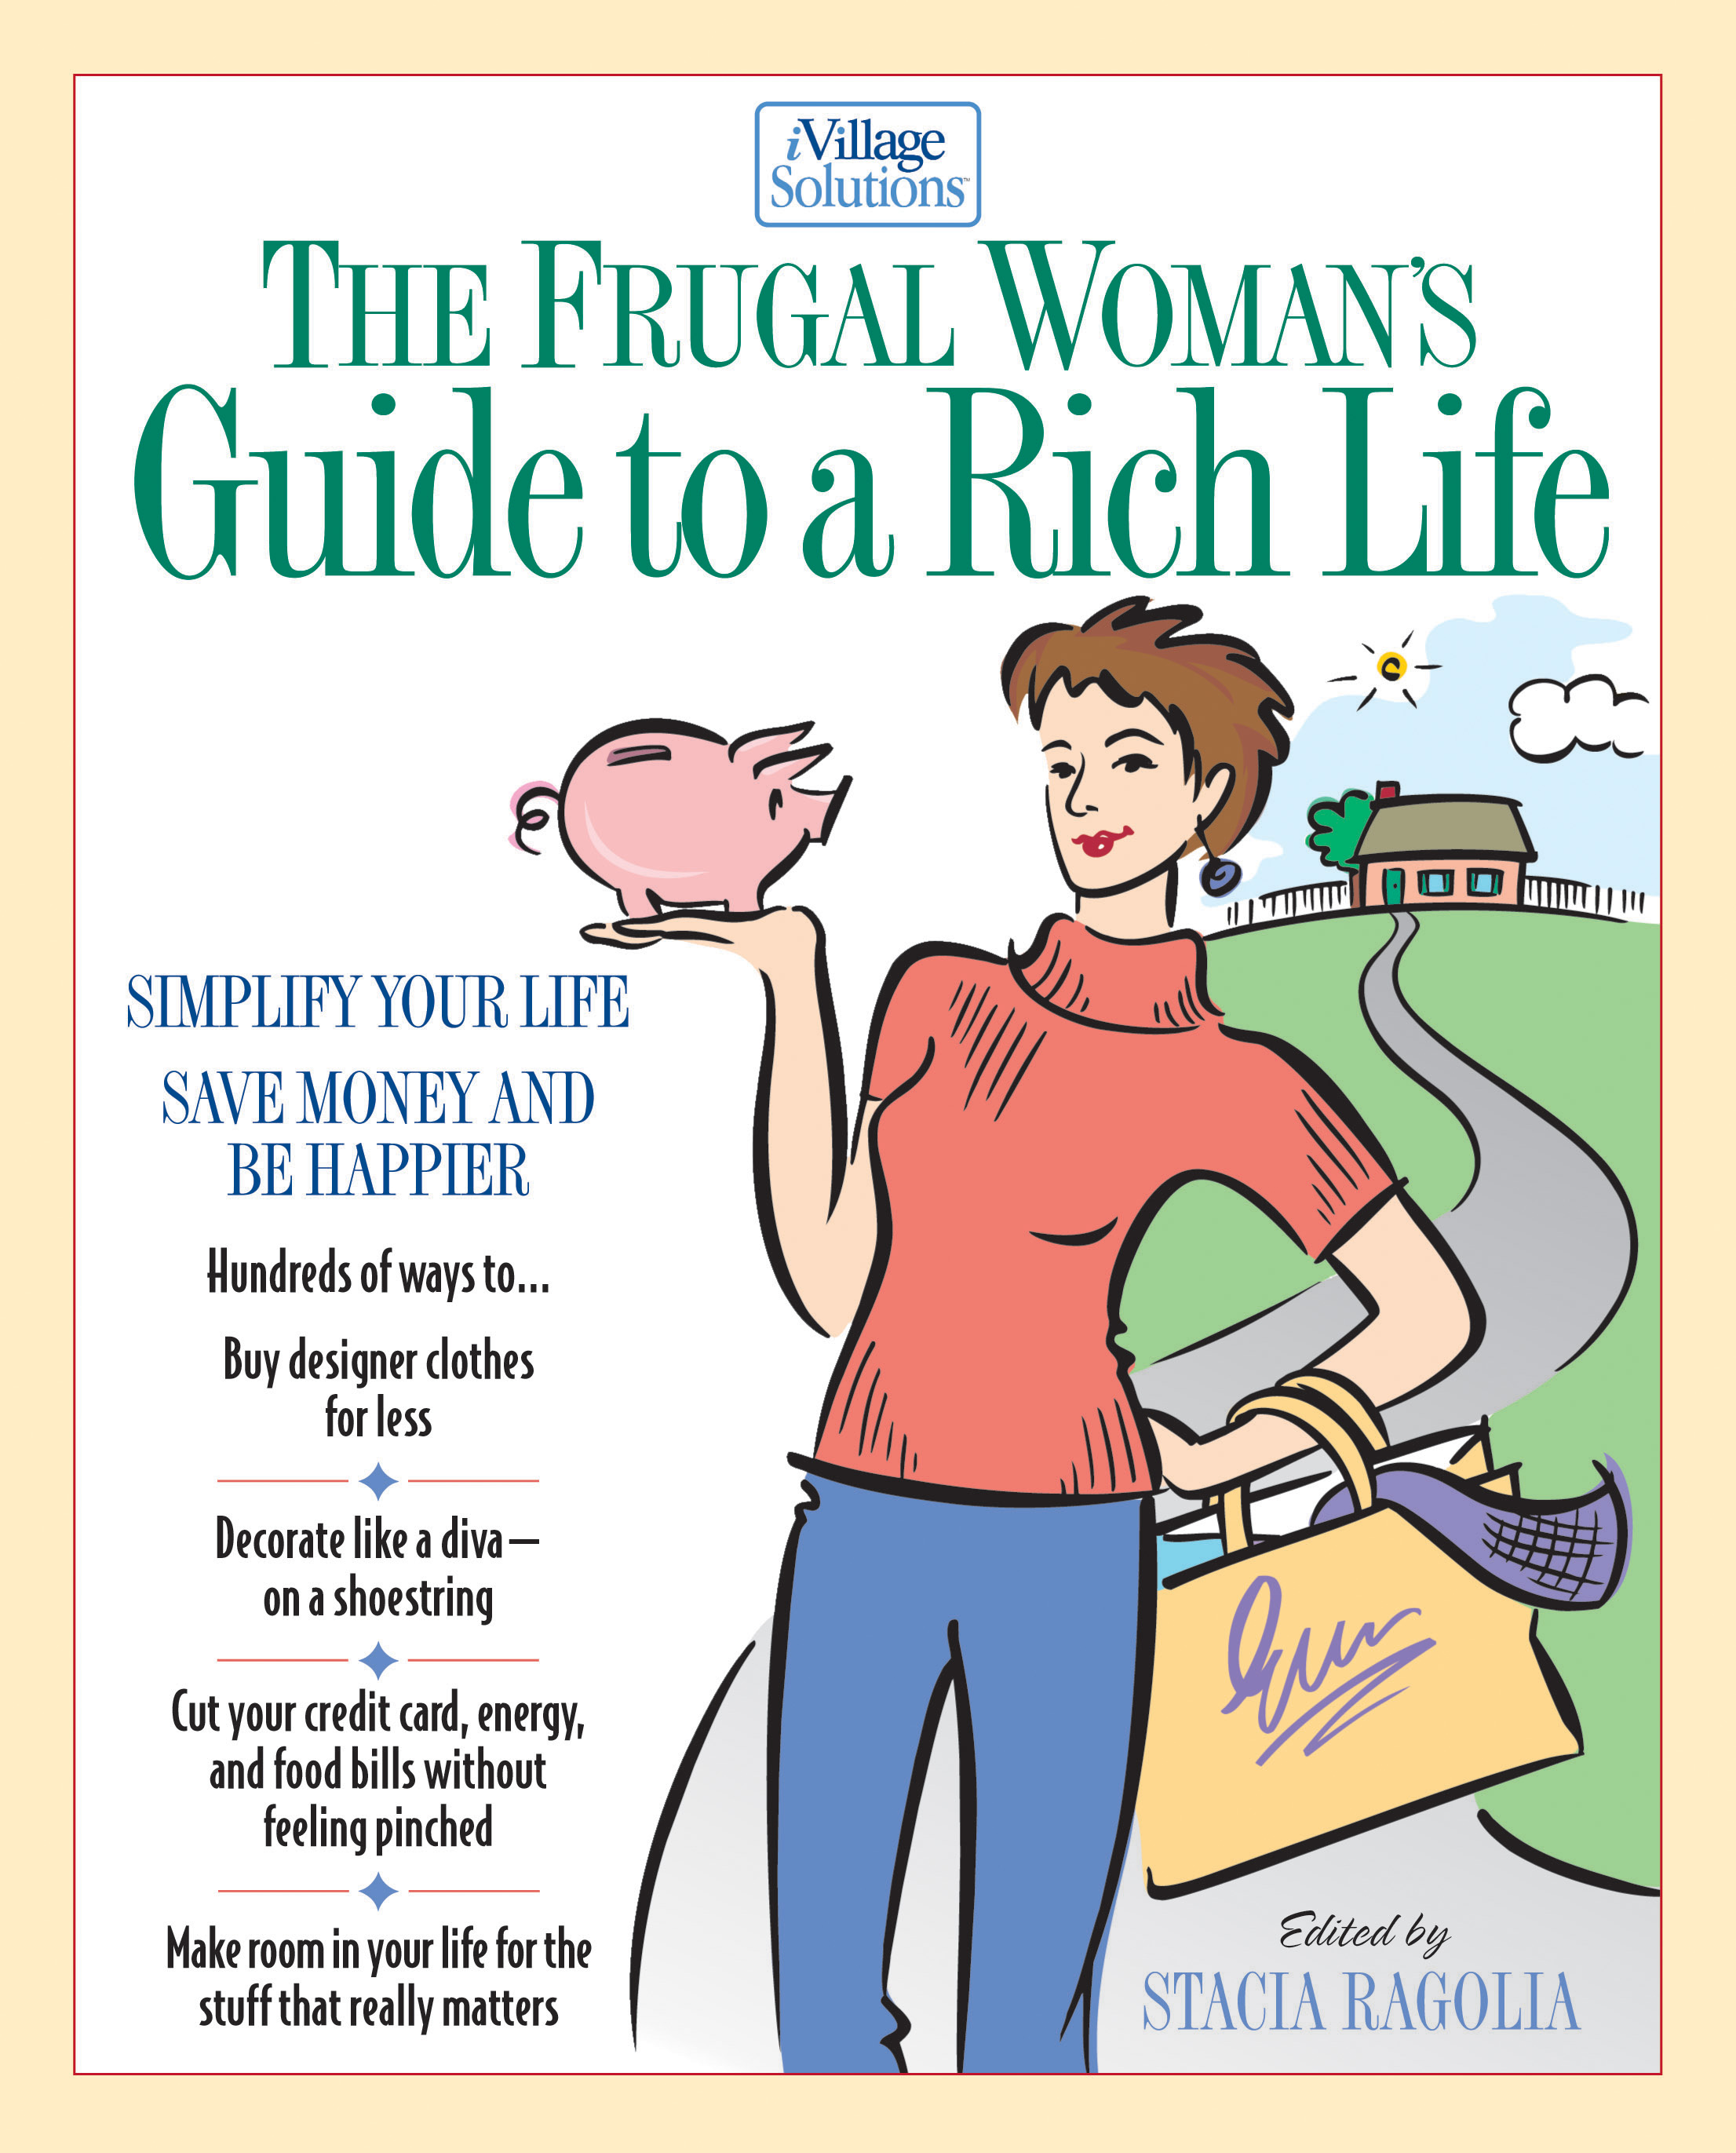 Read The Frugal Woman's Guide to a Rich Life Online by Thomas Nelson